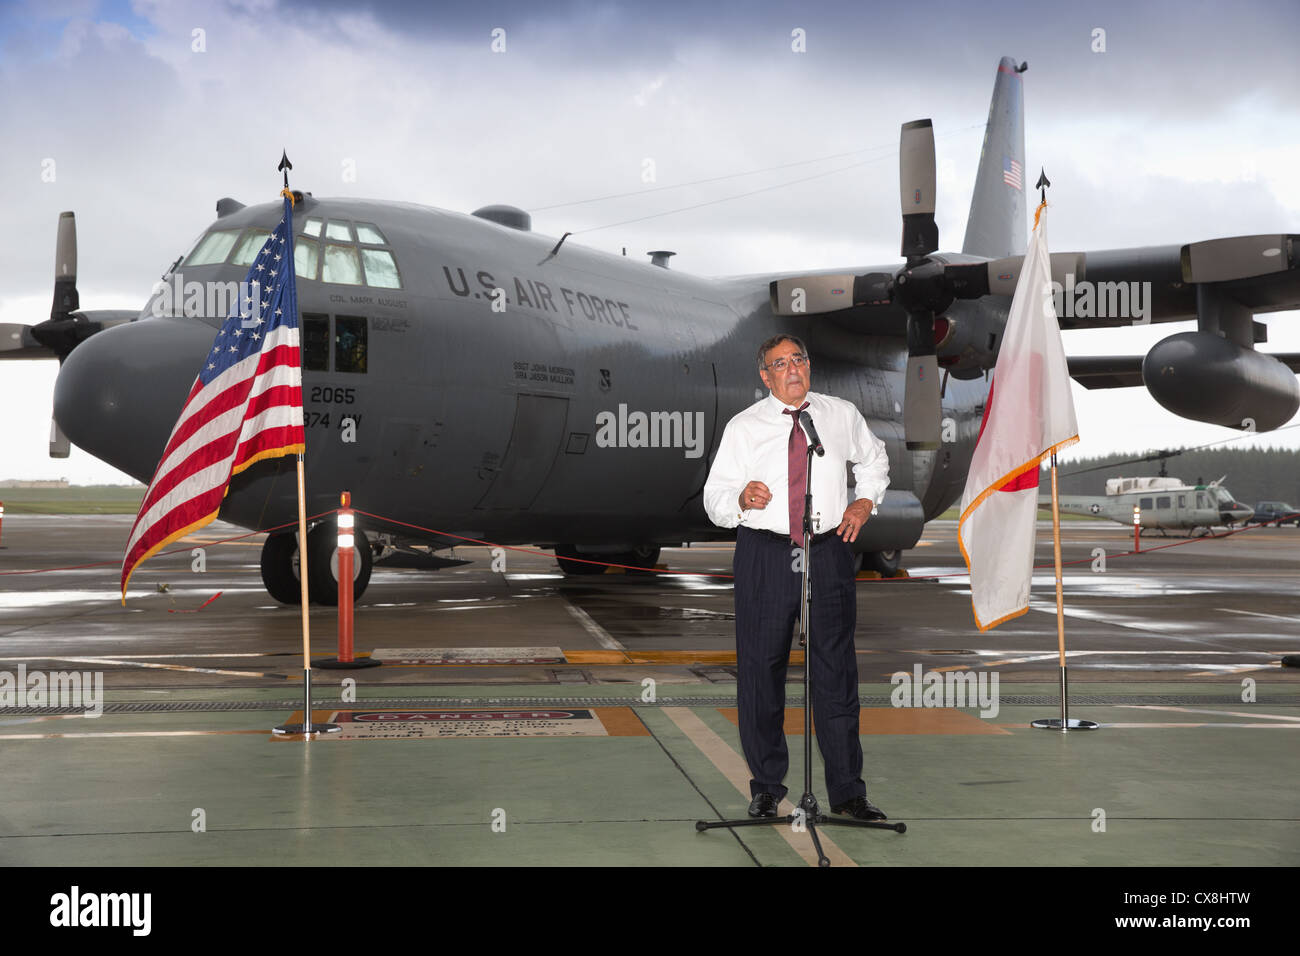 Secretary of Defense Leon E. Panetta discusses current issues facing the U.S. military during his visit to Yokota Air Base, Sept. 17, 2012. Panetta is slated to travel to China and New Zealand following his visit at Yokota. Stock Photo